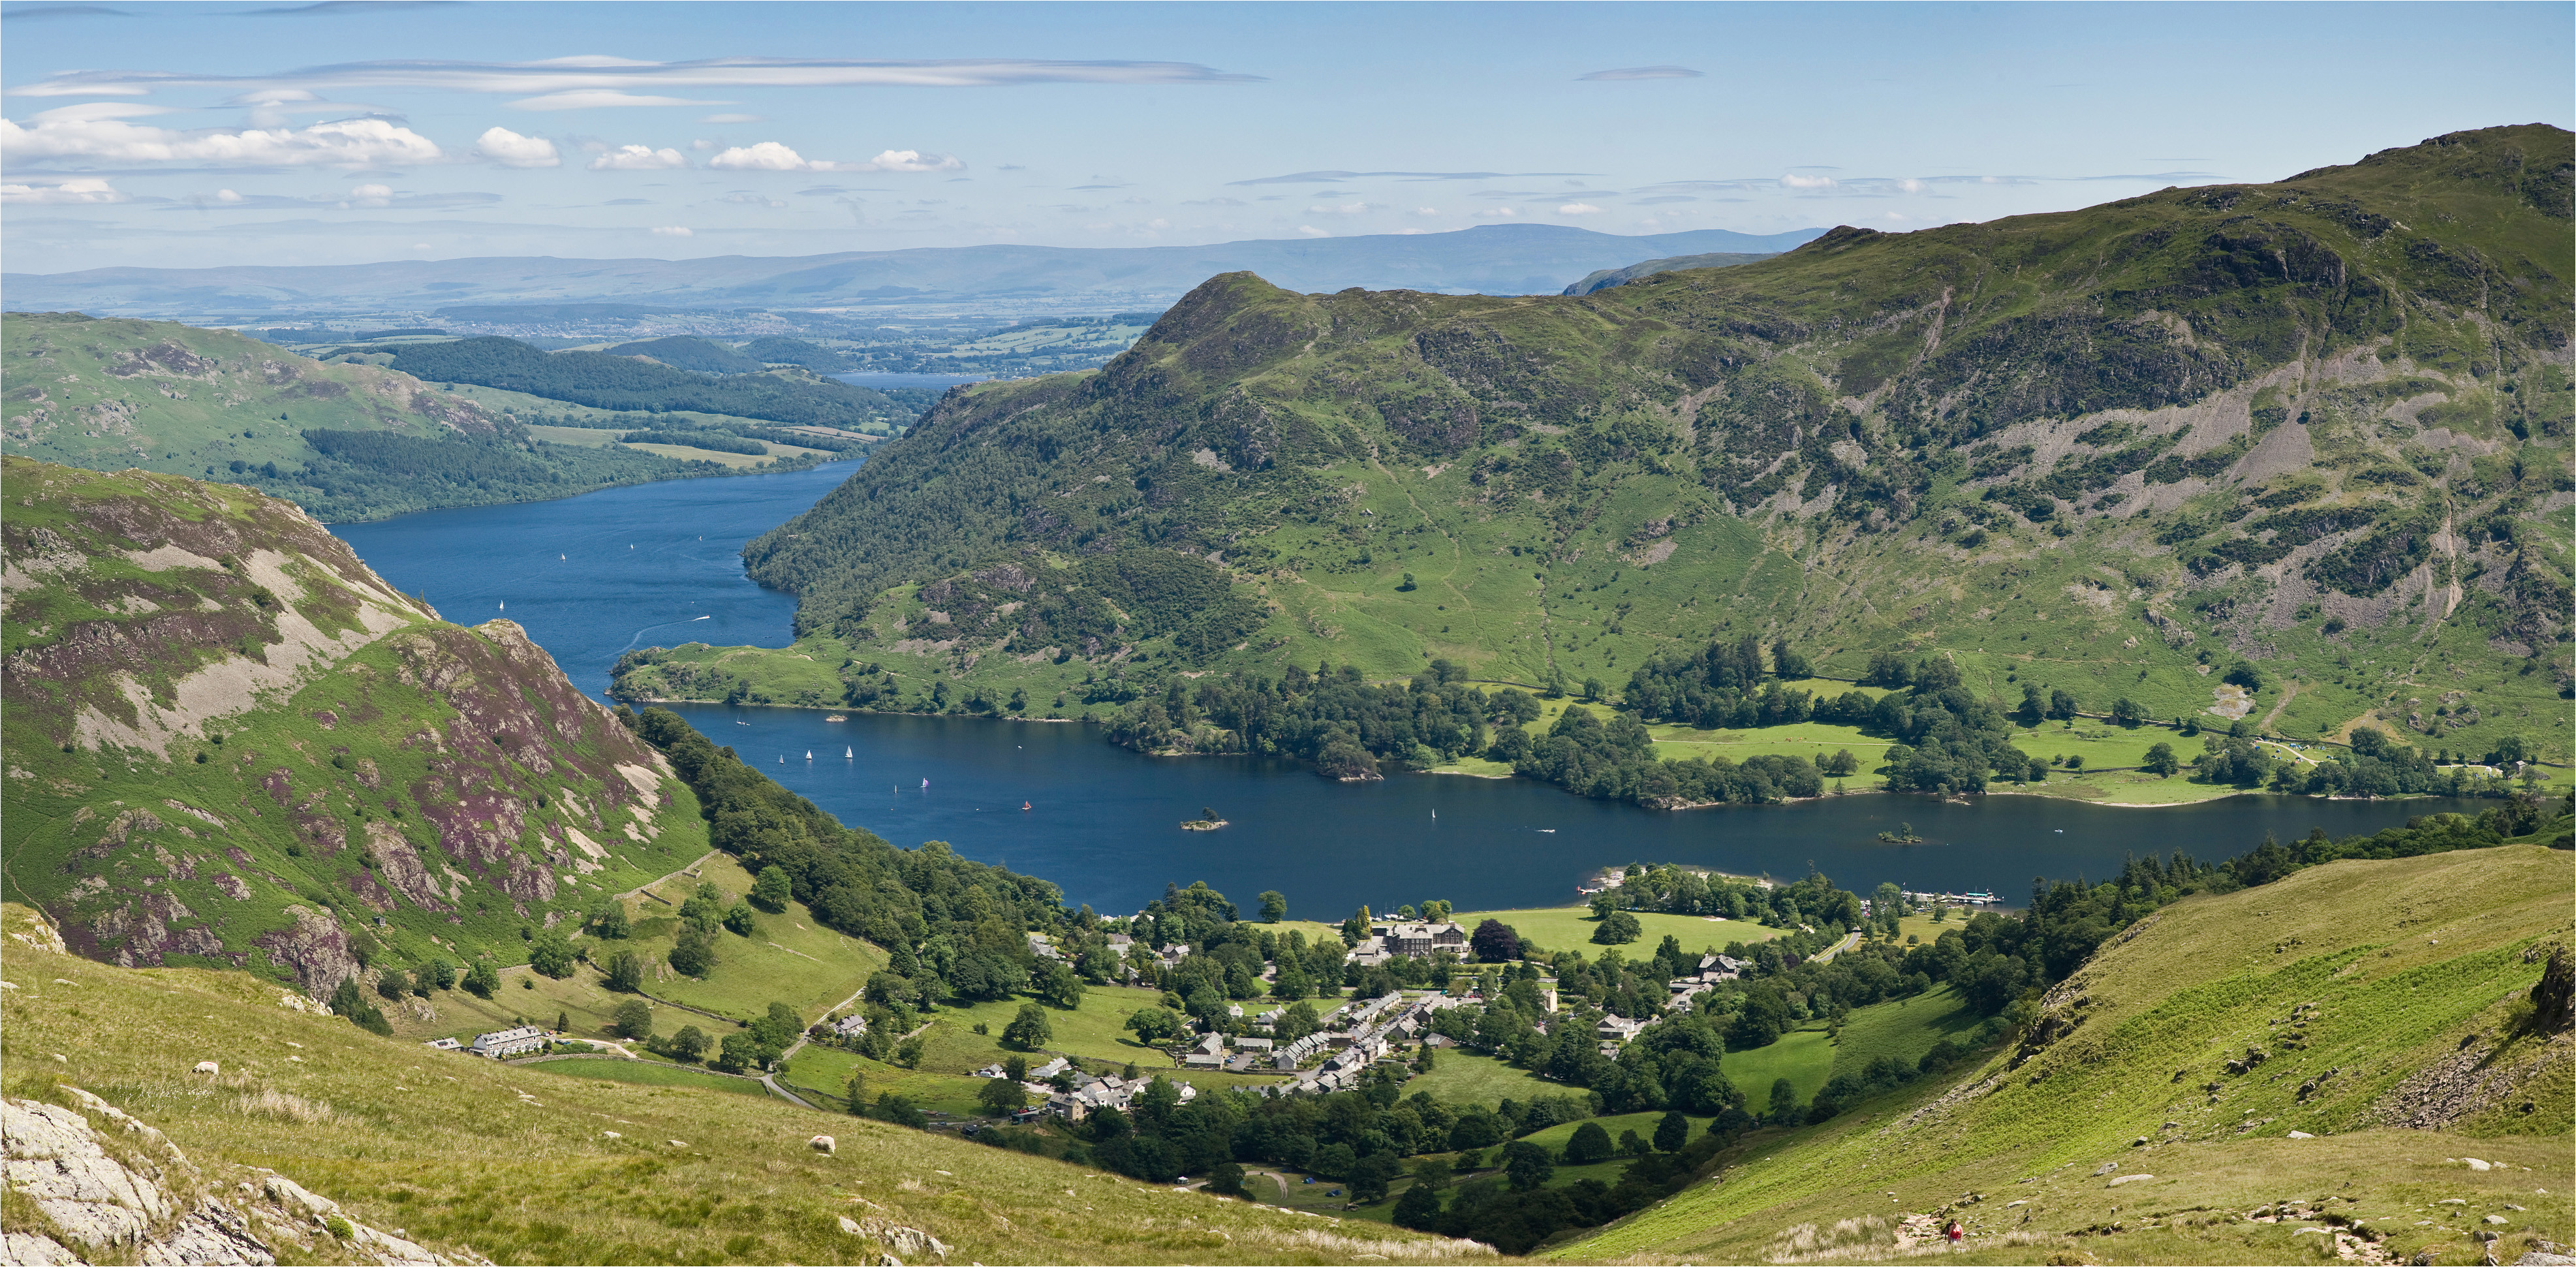 list of hill passes of the lake district wikipedia